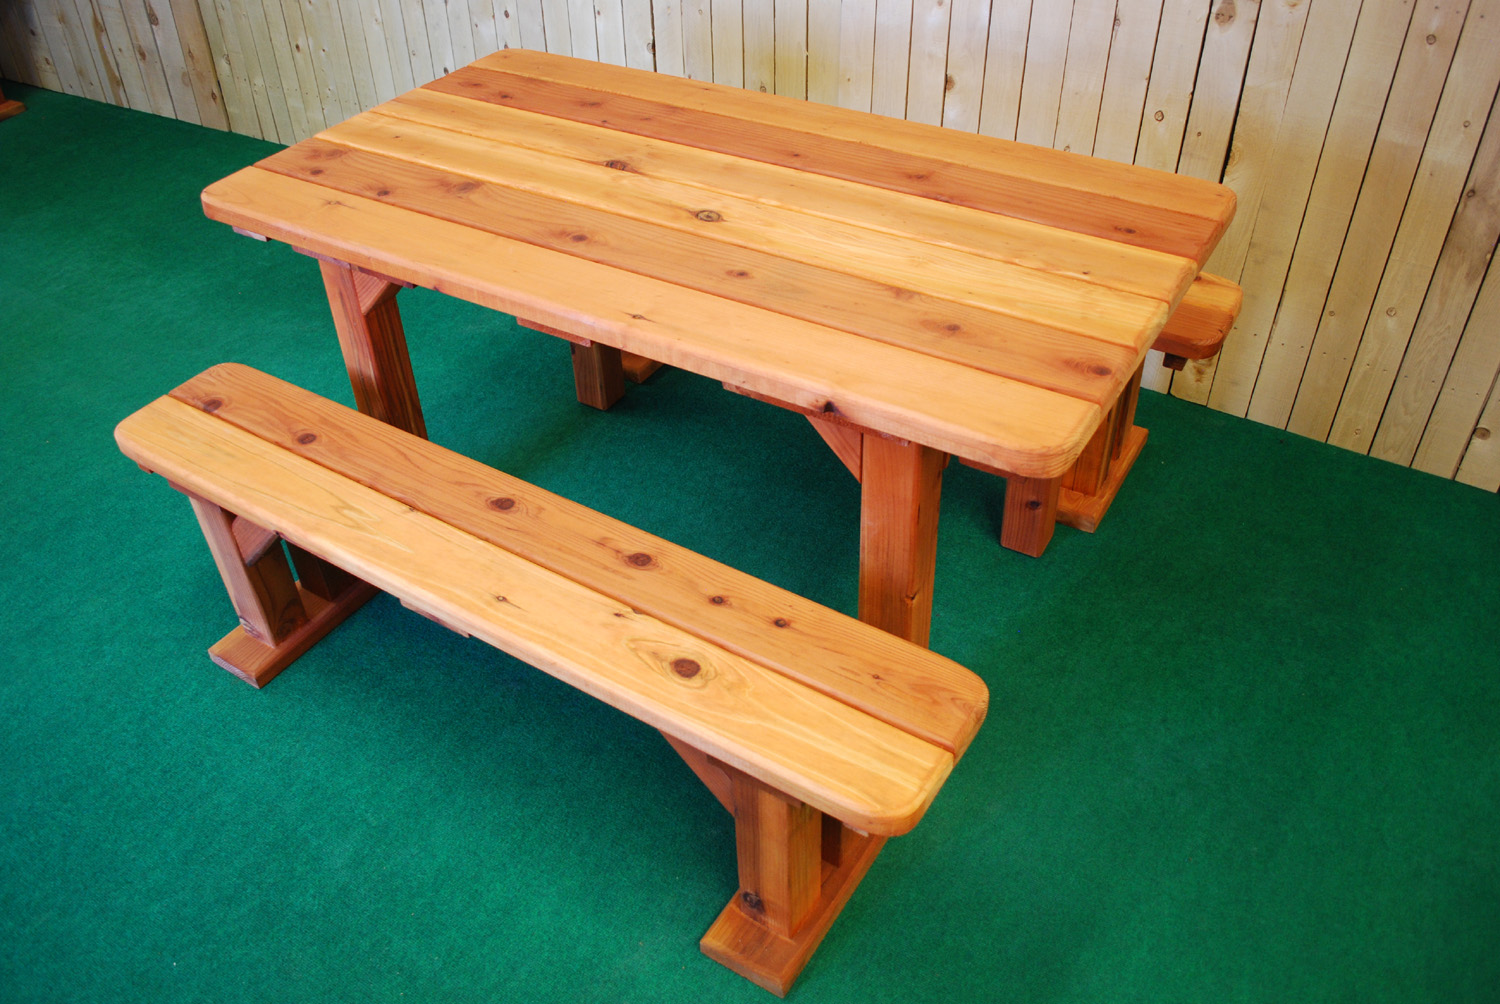 60" redwood rectangle picnic table